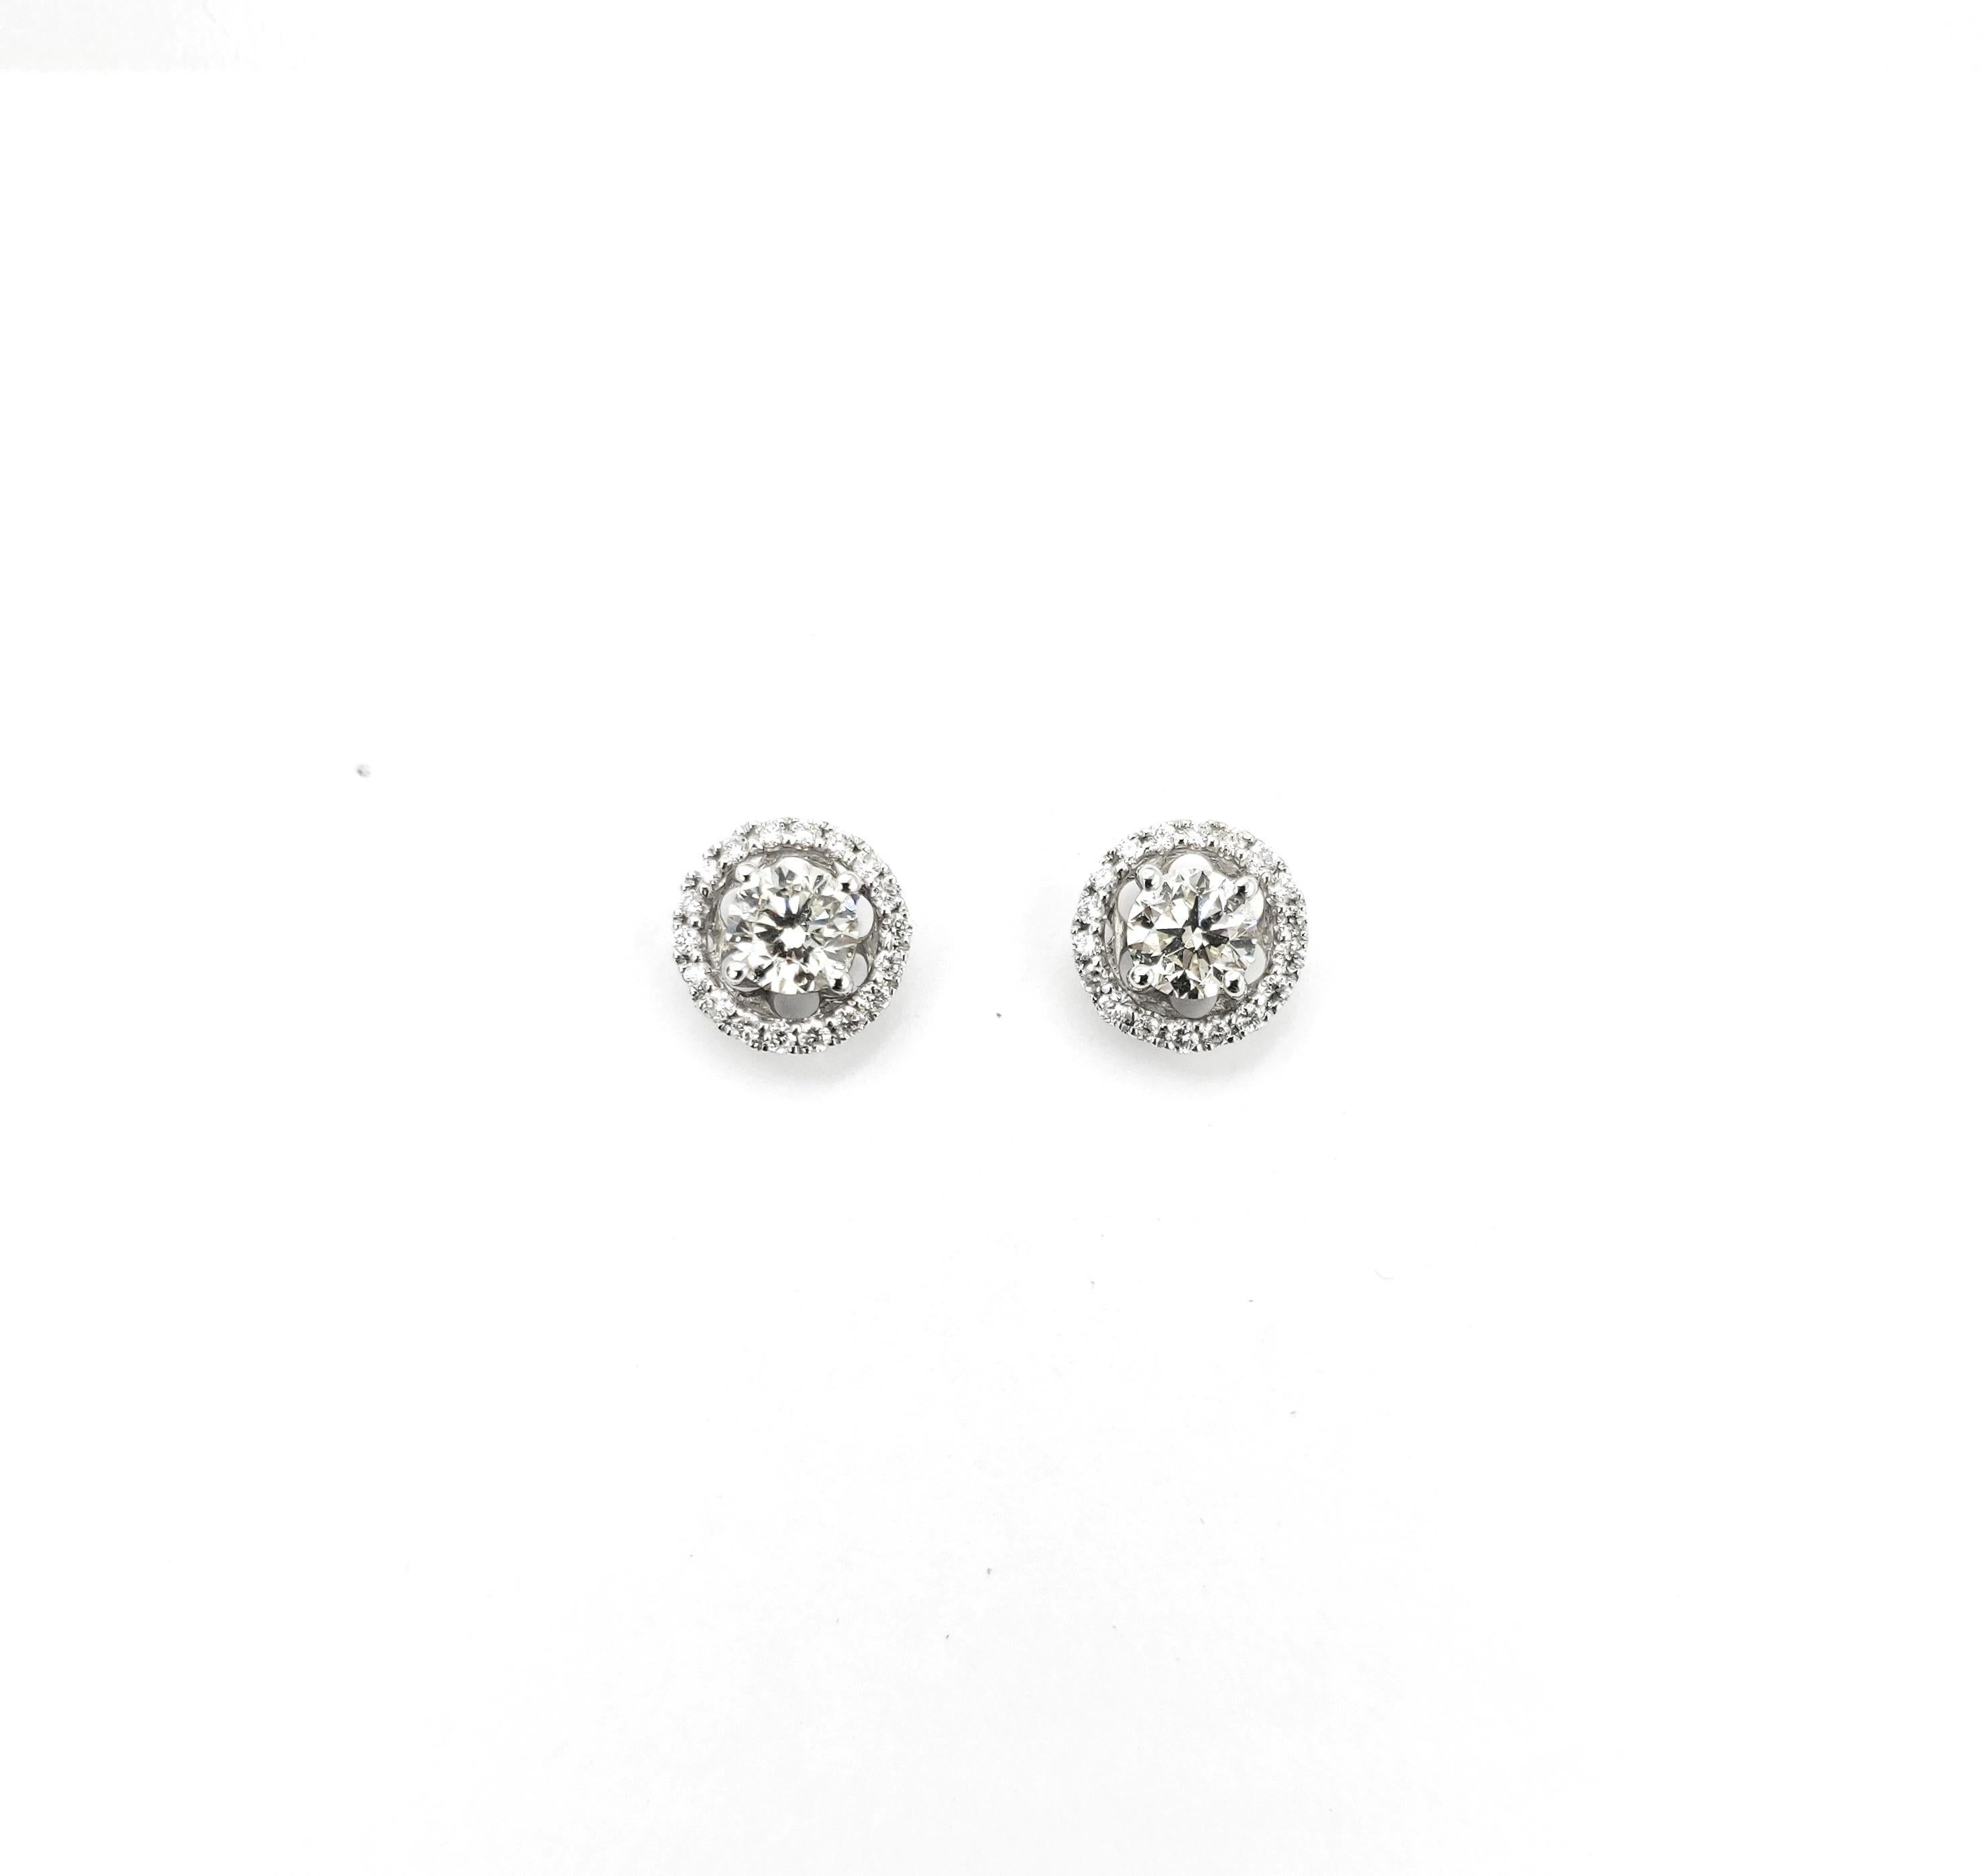 0.62 Carat Diamond Studs with Diamond Halo Jackets in 18 Karat White Gold

Diamond: 0.8ct.
Gold: 18K 2.75g.

Please let us know should you wish to have new earrings made with centre stones of your choice.